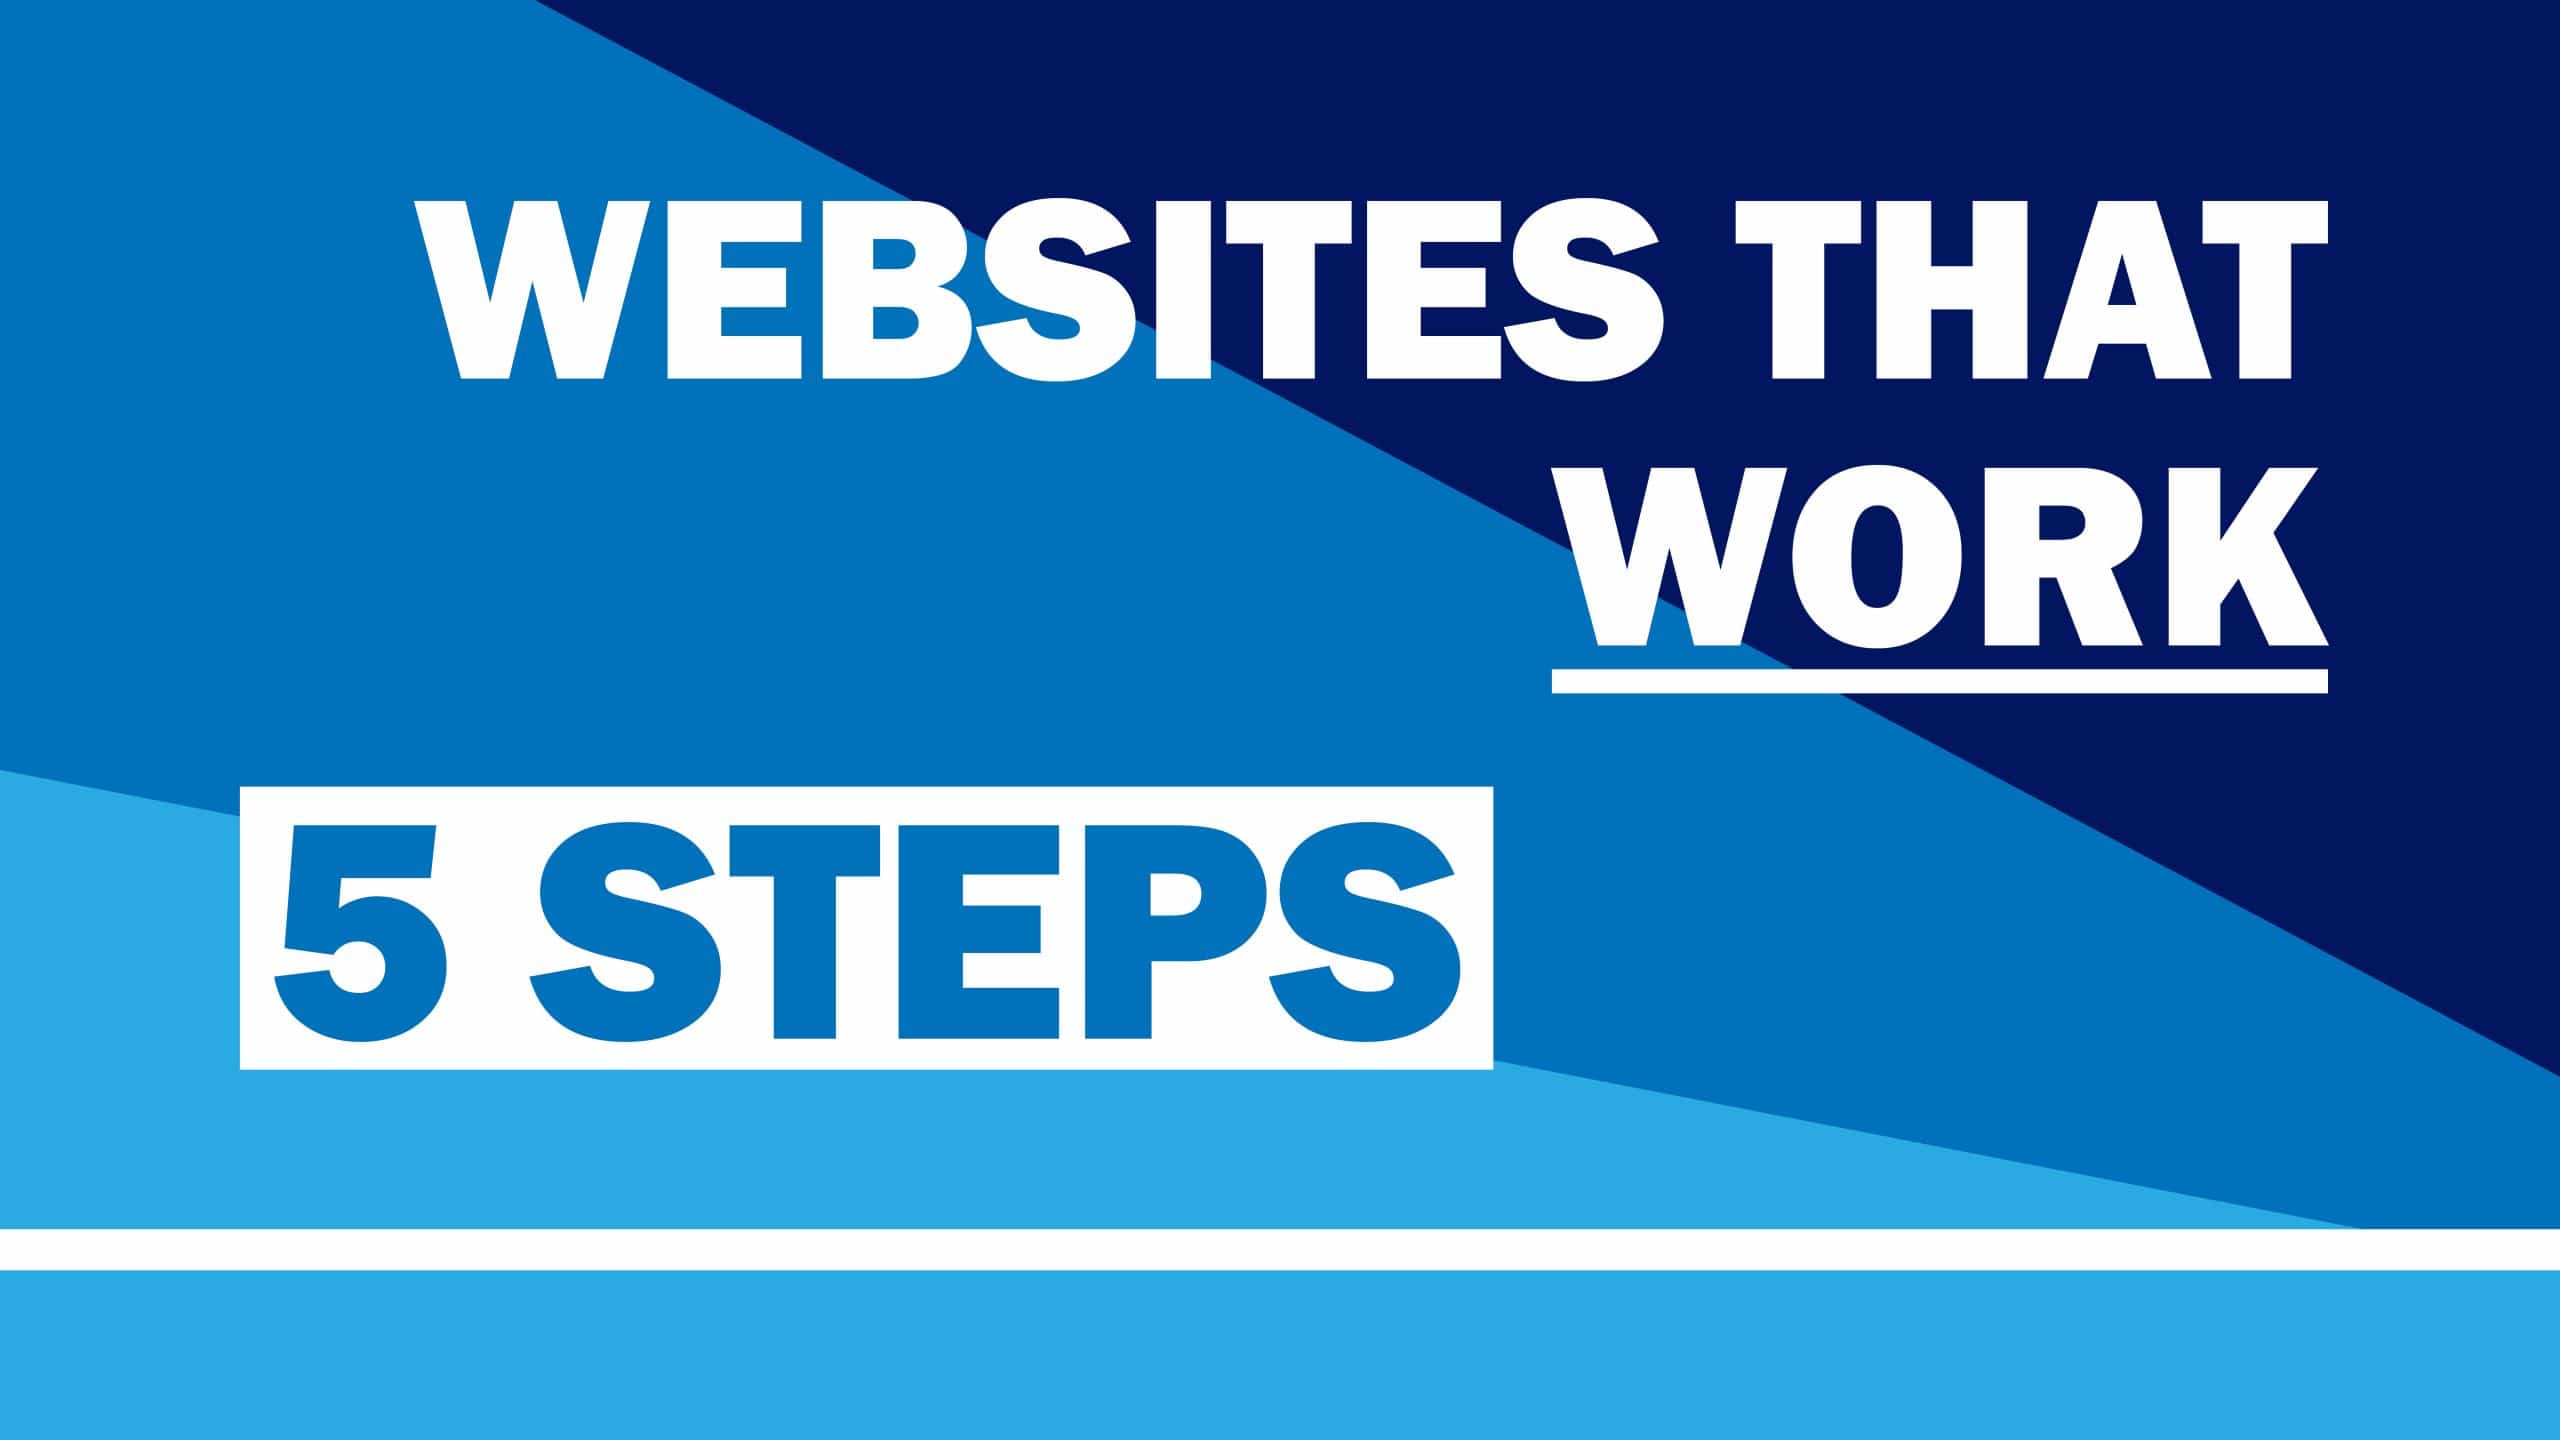 The 5 Things Your Website Homepage Must Have